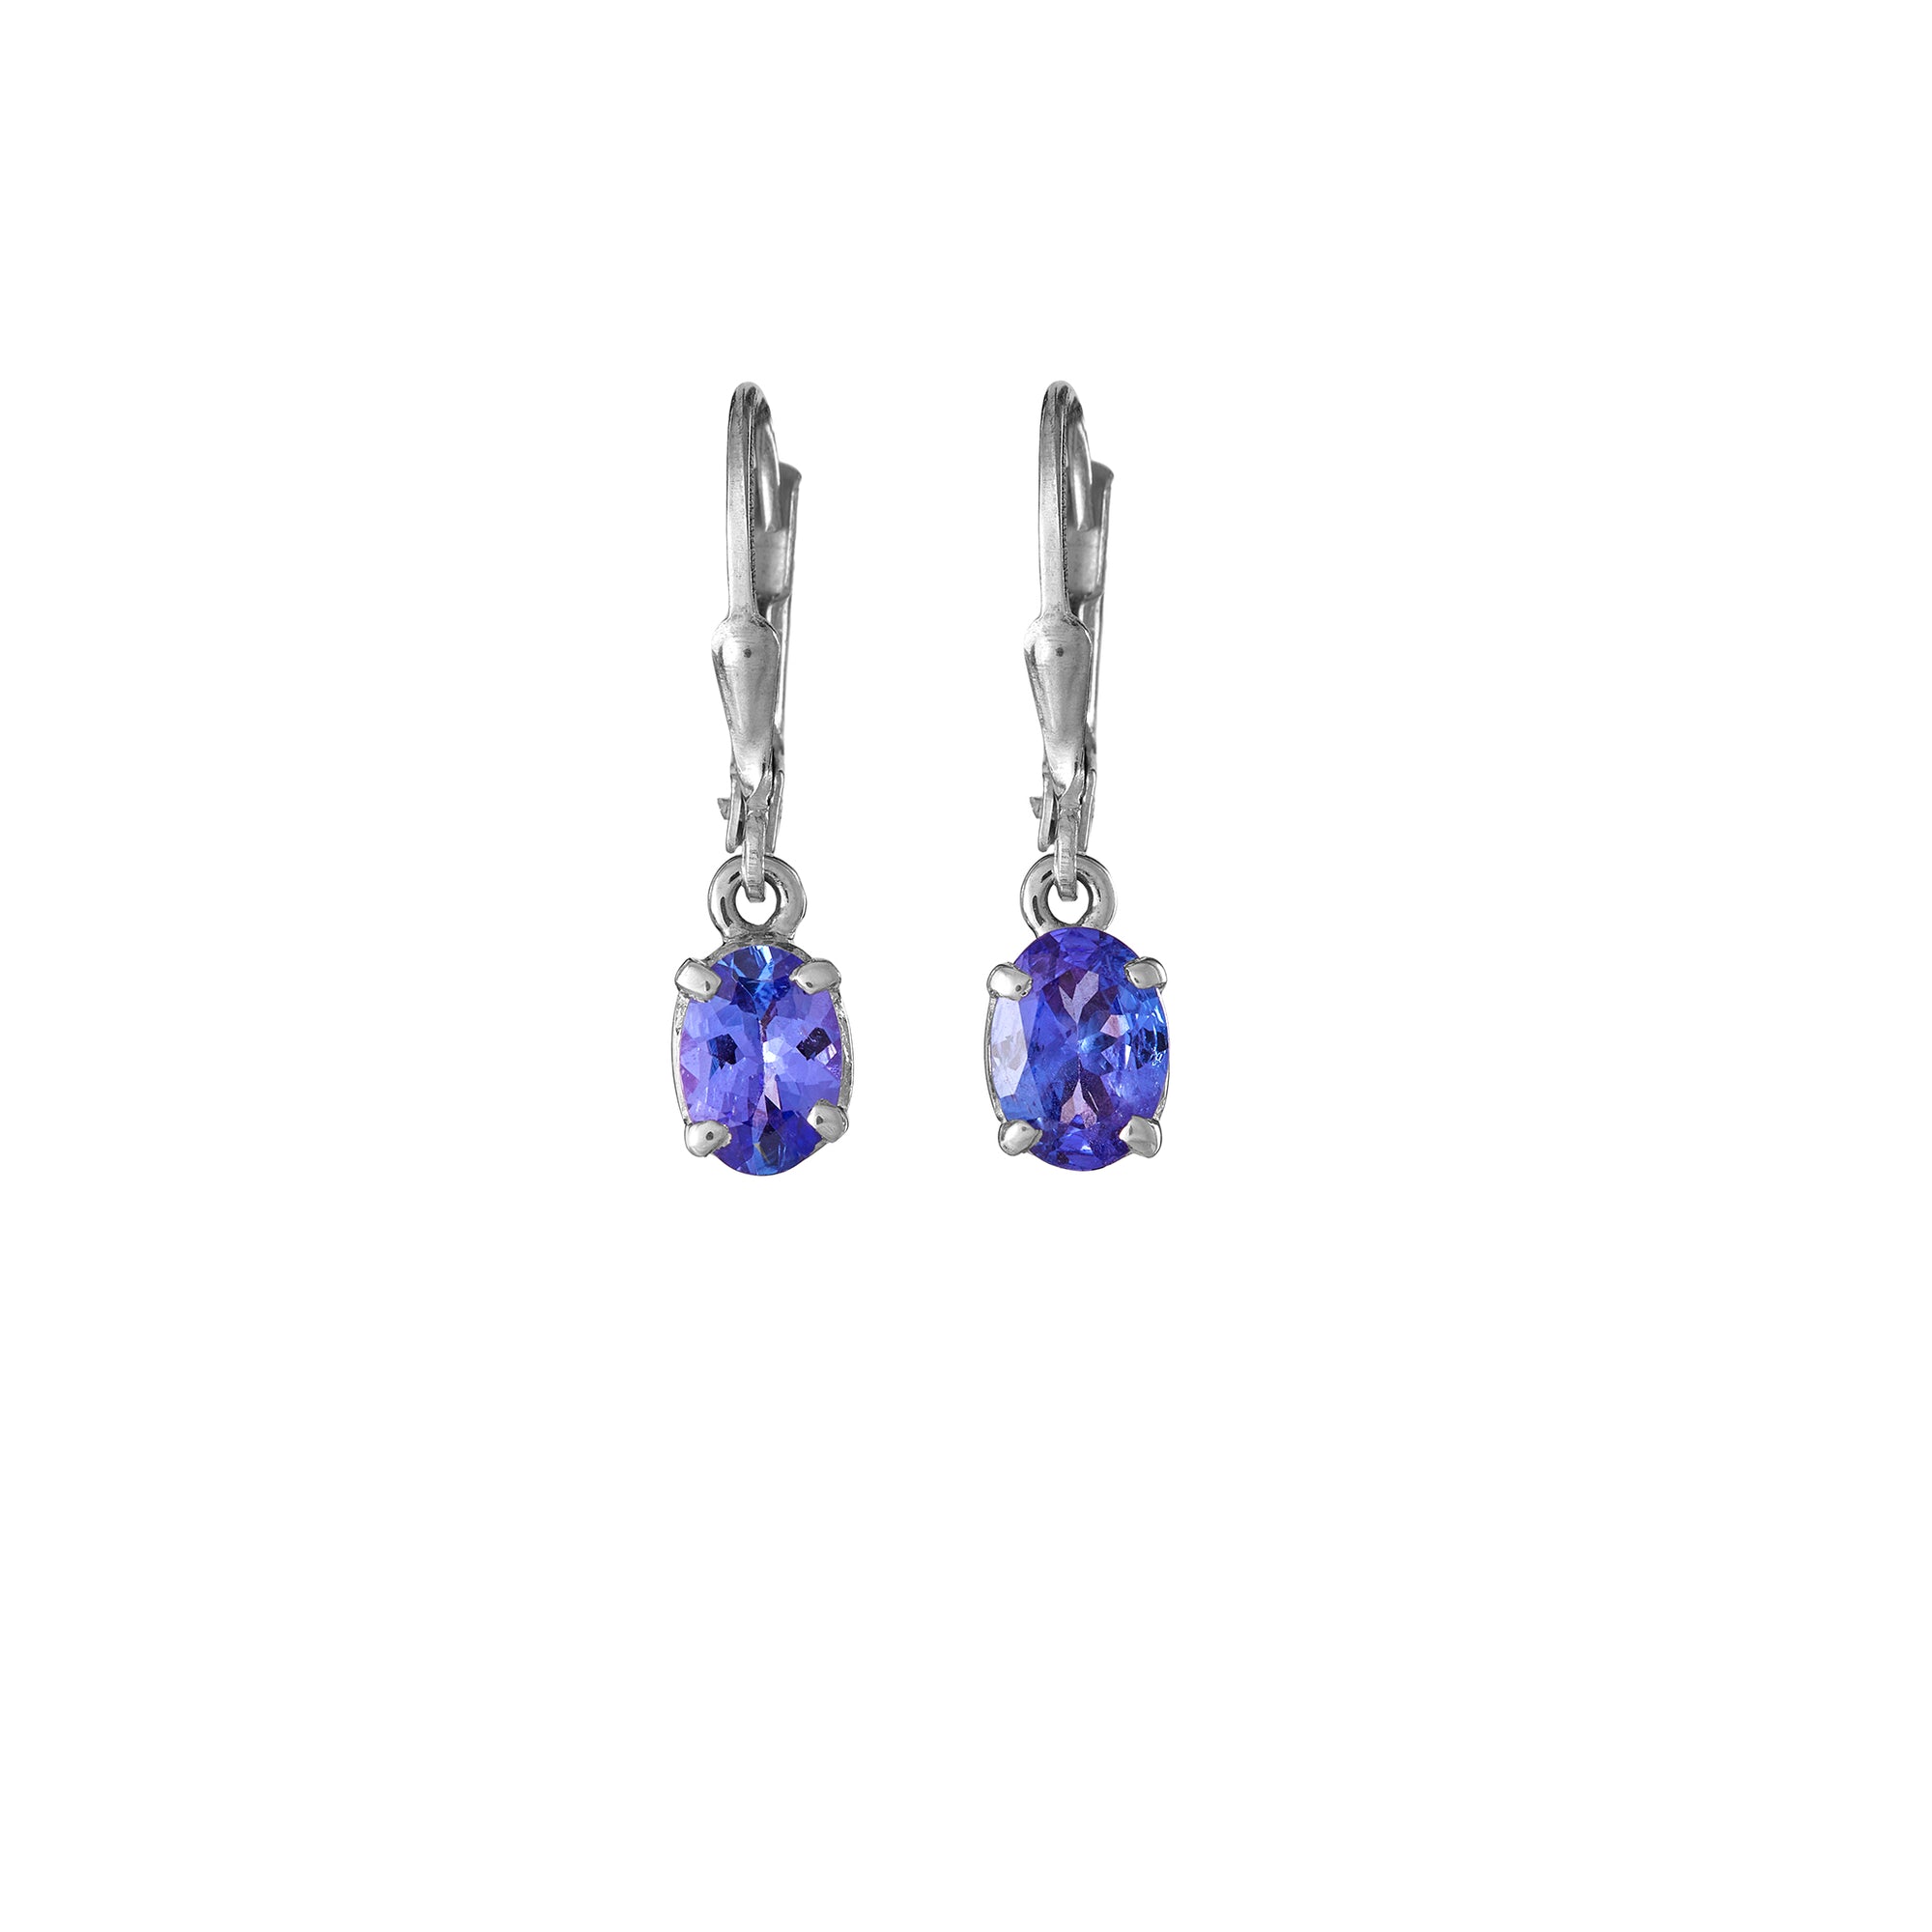 Facetted tanzanite earrings